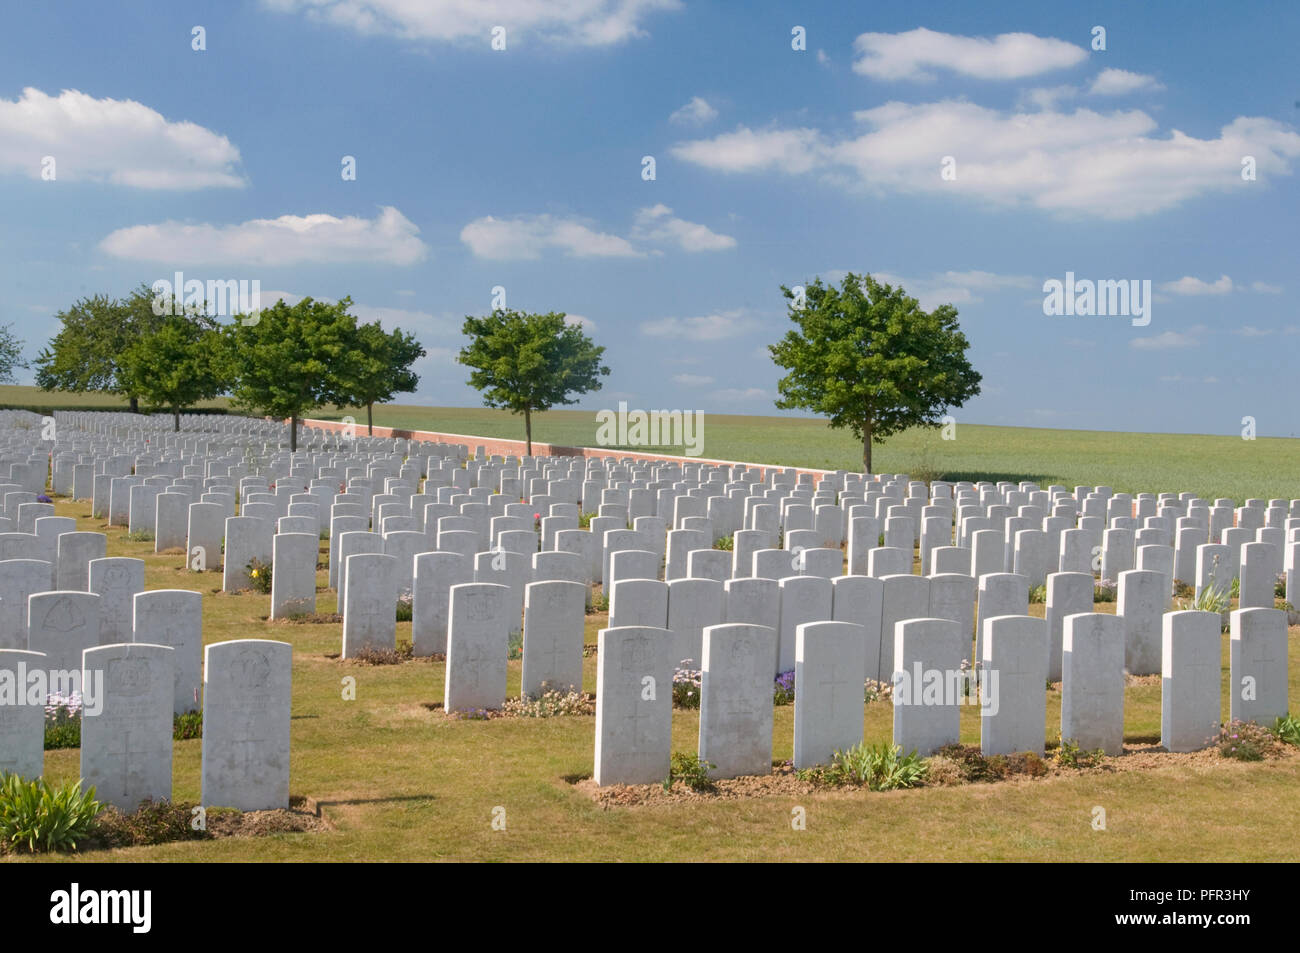 France, Somme area, Ovillers-la-Boisselle village, Ovillers British Military Cemetery, soldiers' graves Stock Photo